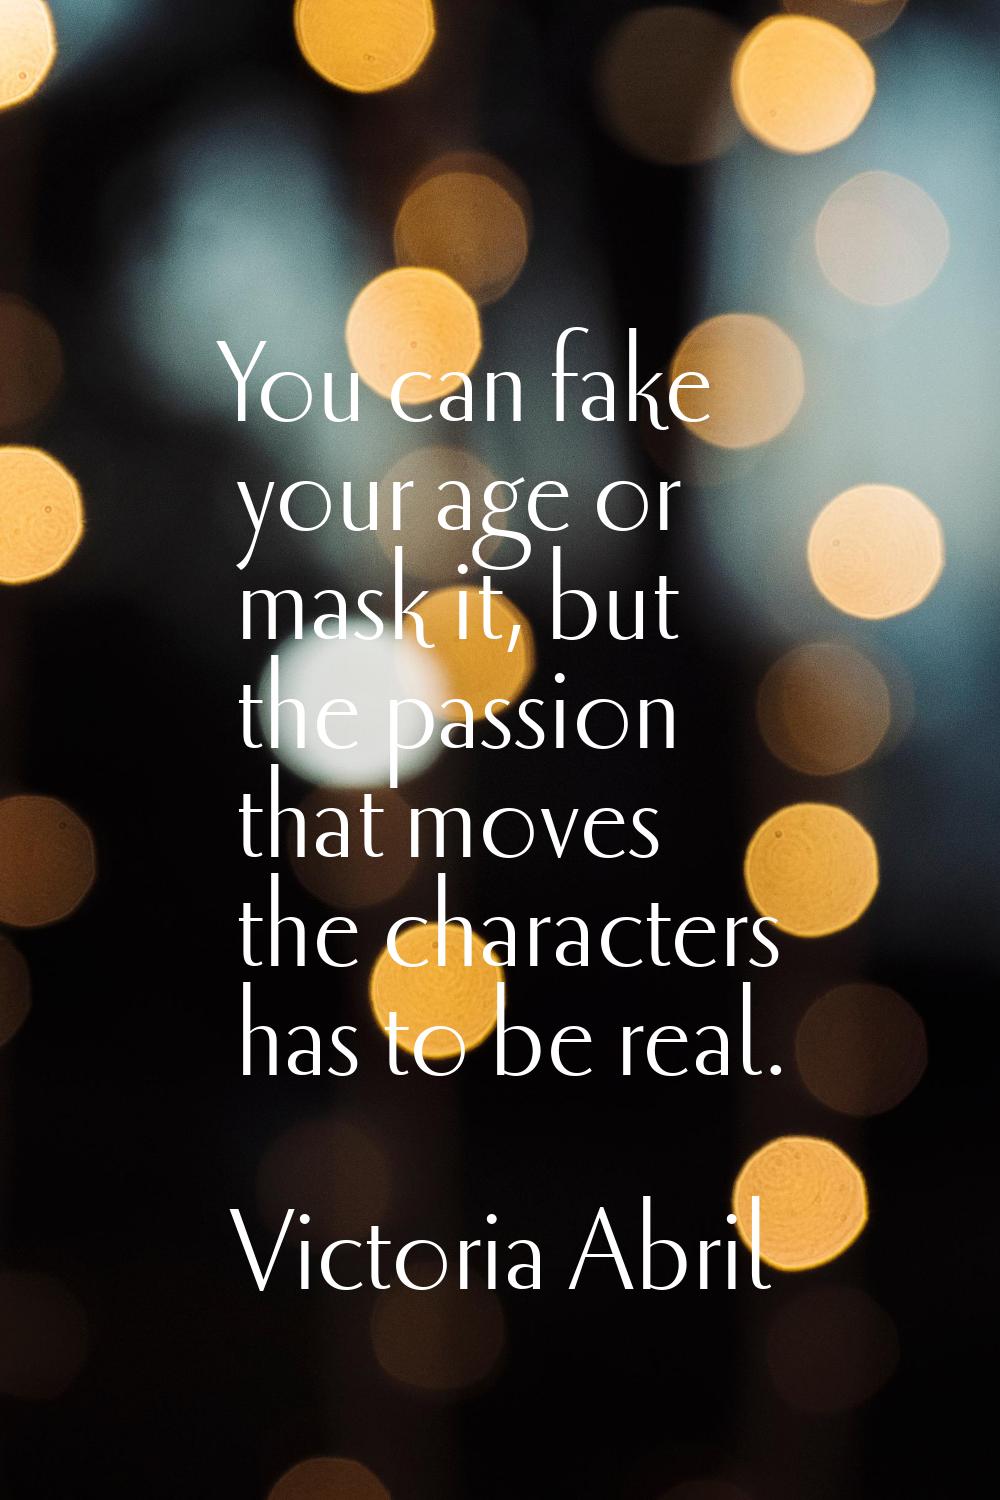 You can fake your age or mask it, but the passion that moves the characters has to be real.